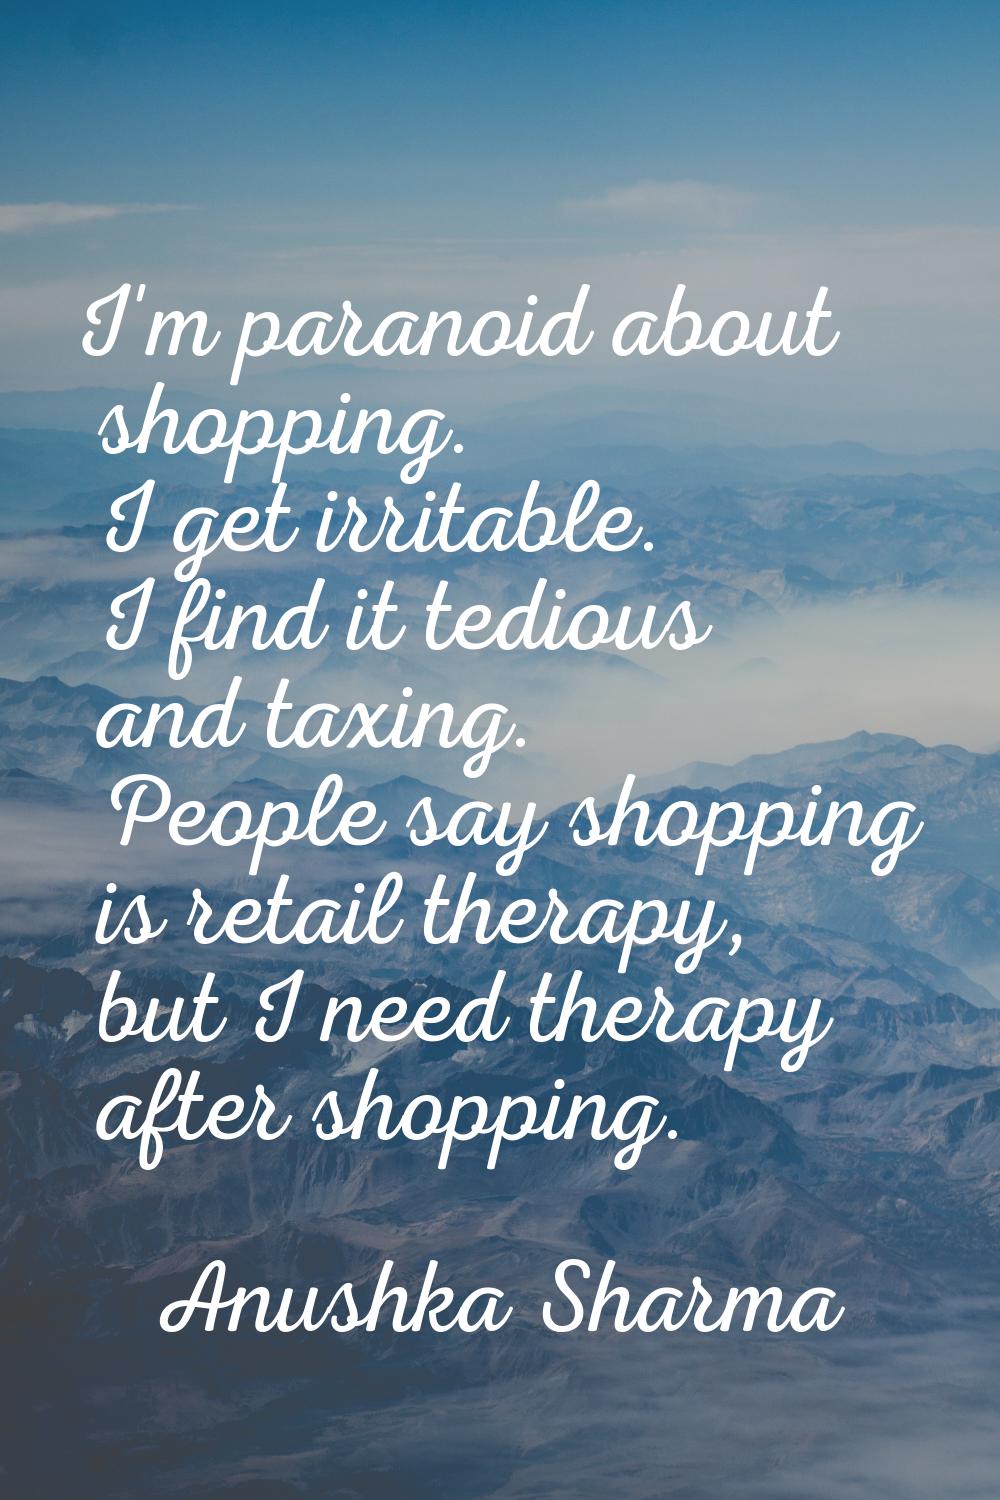 I'm paranoid about shopping. I get irritable. I find it tedious and taxing. People say shopping is 